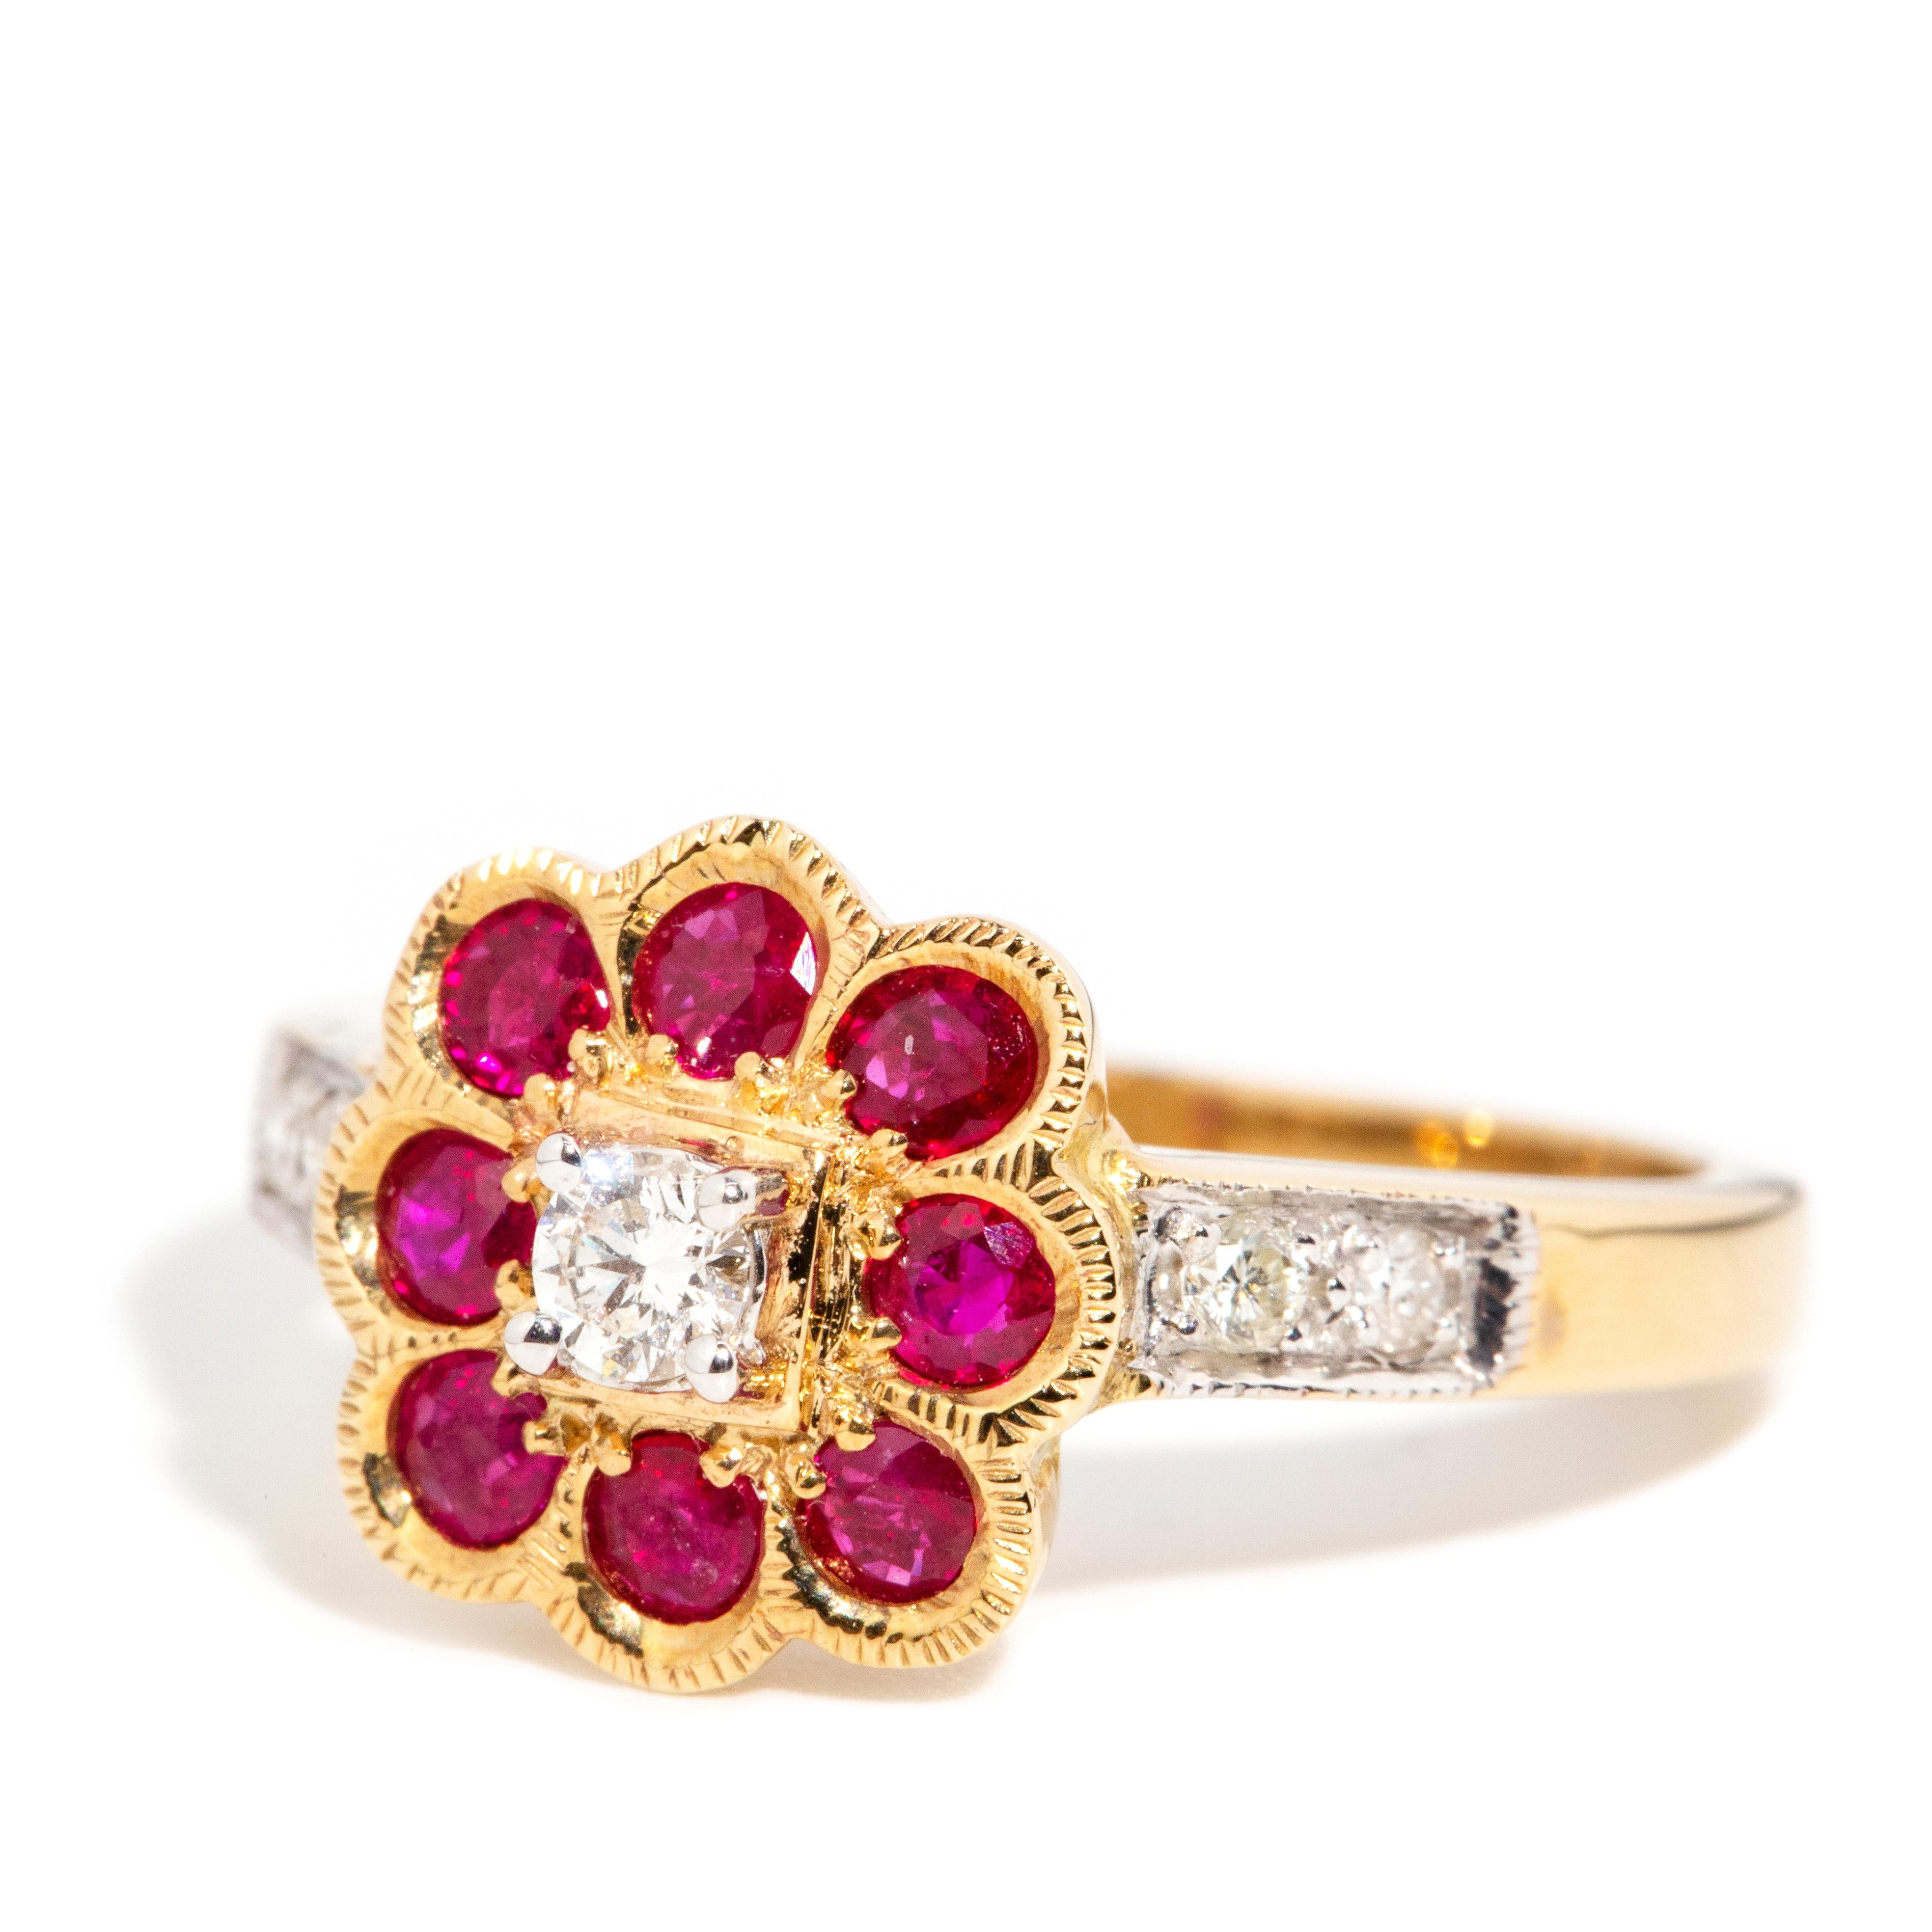 Vintage Inspired Bright Deep Red Ruby & Diamond Cluster Ring 9 Carat Yellow Gold In New Condition For Sale In Hamilton, AU